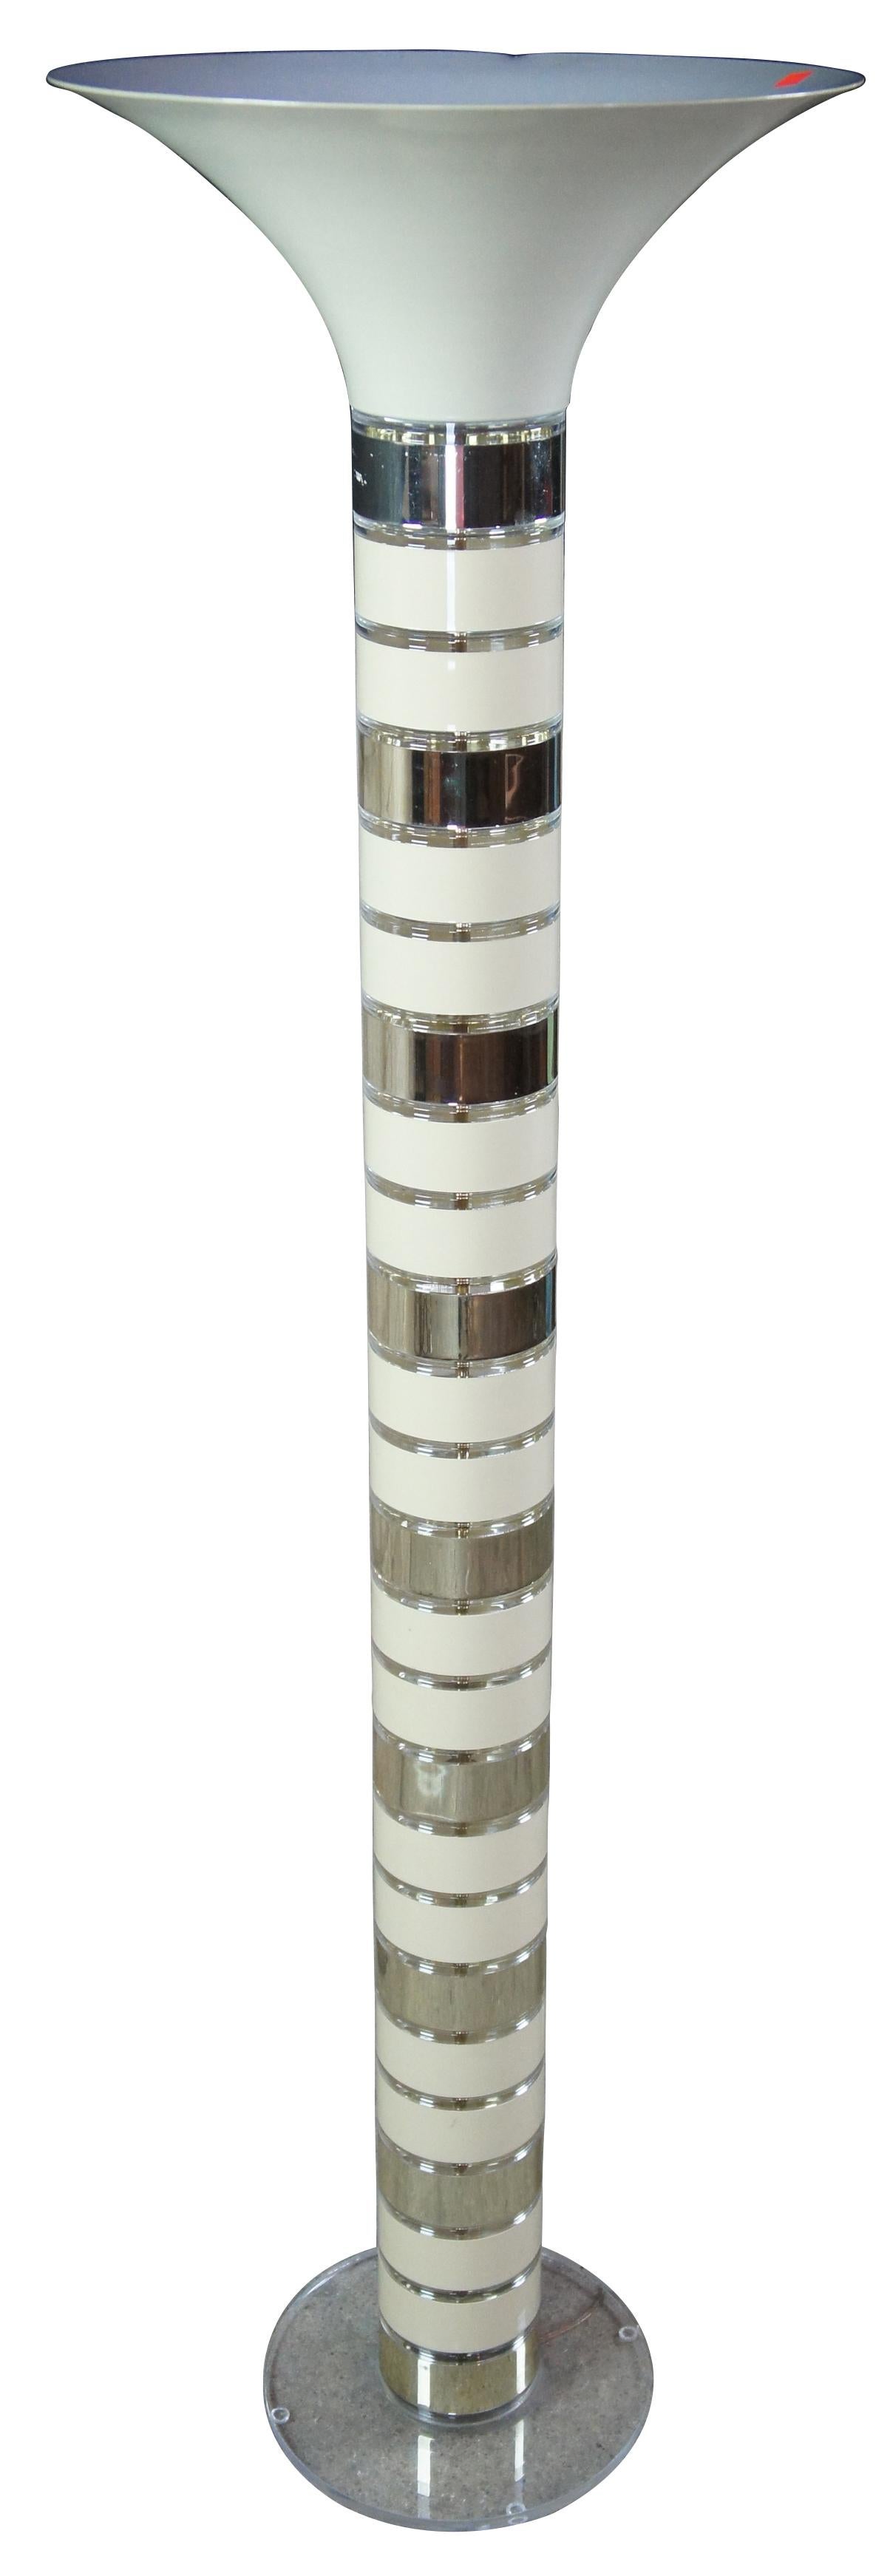 Vintage Hollywood Regency style floor lamp. Features a stacked design with enamel and banding. Measure: 67